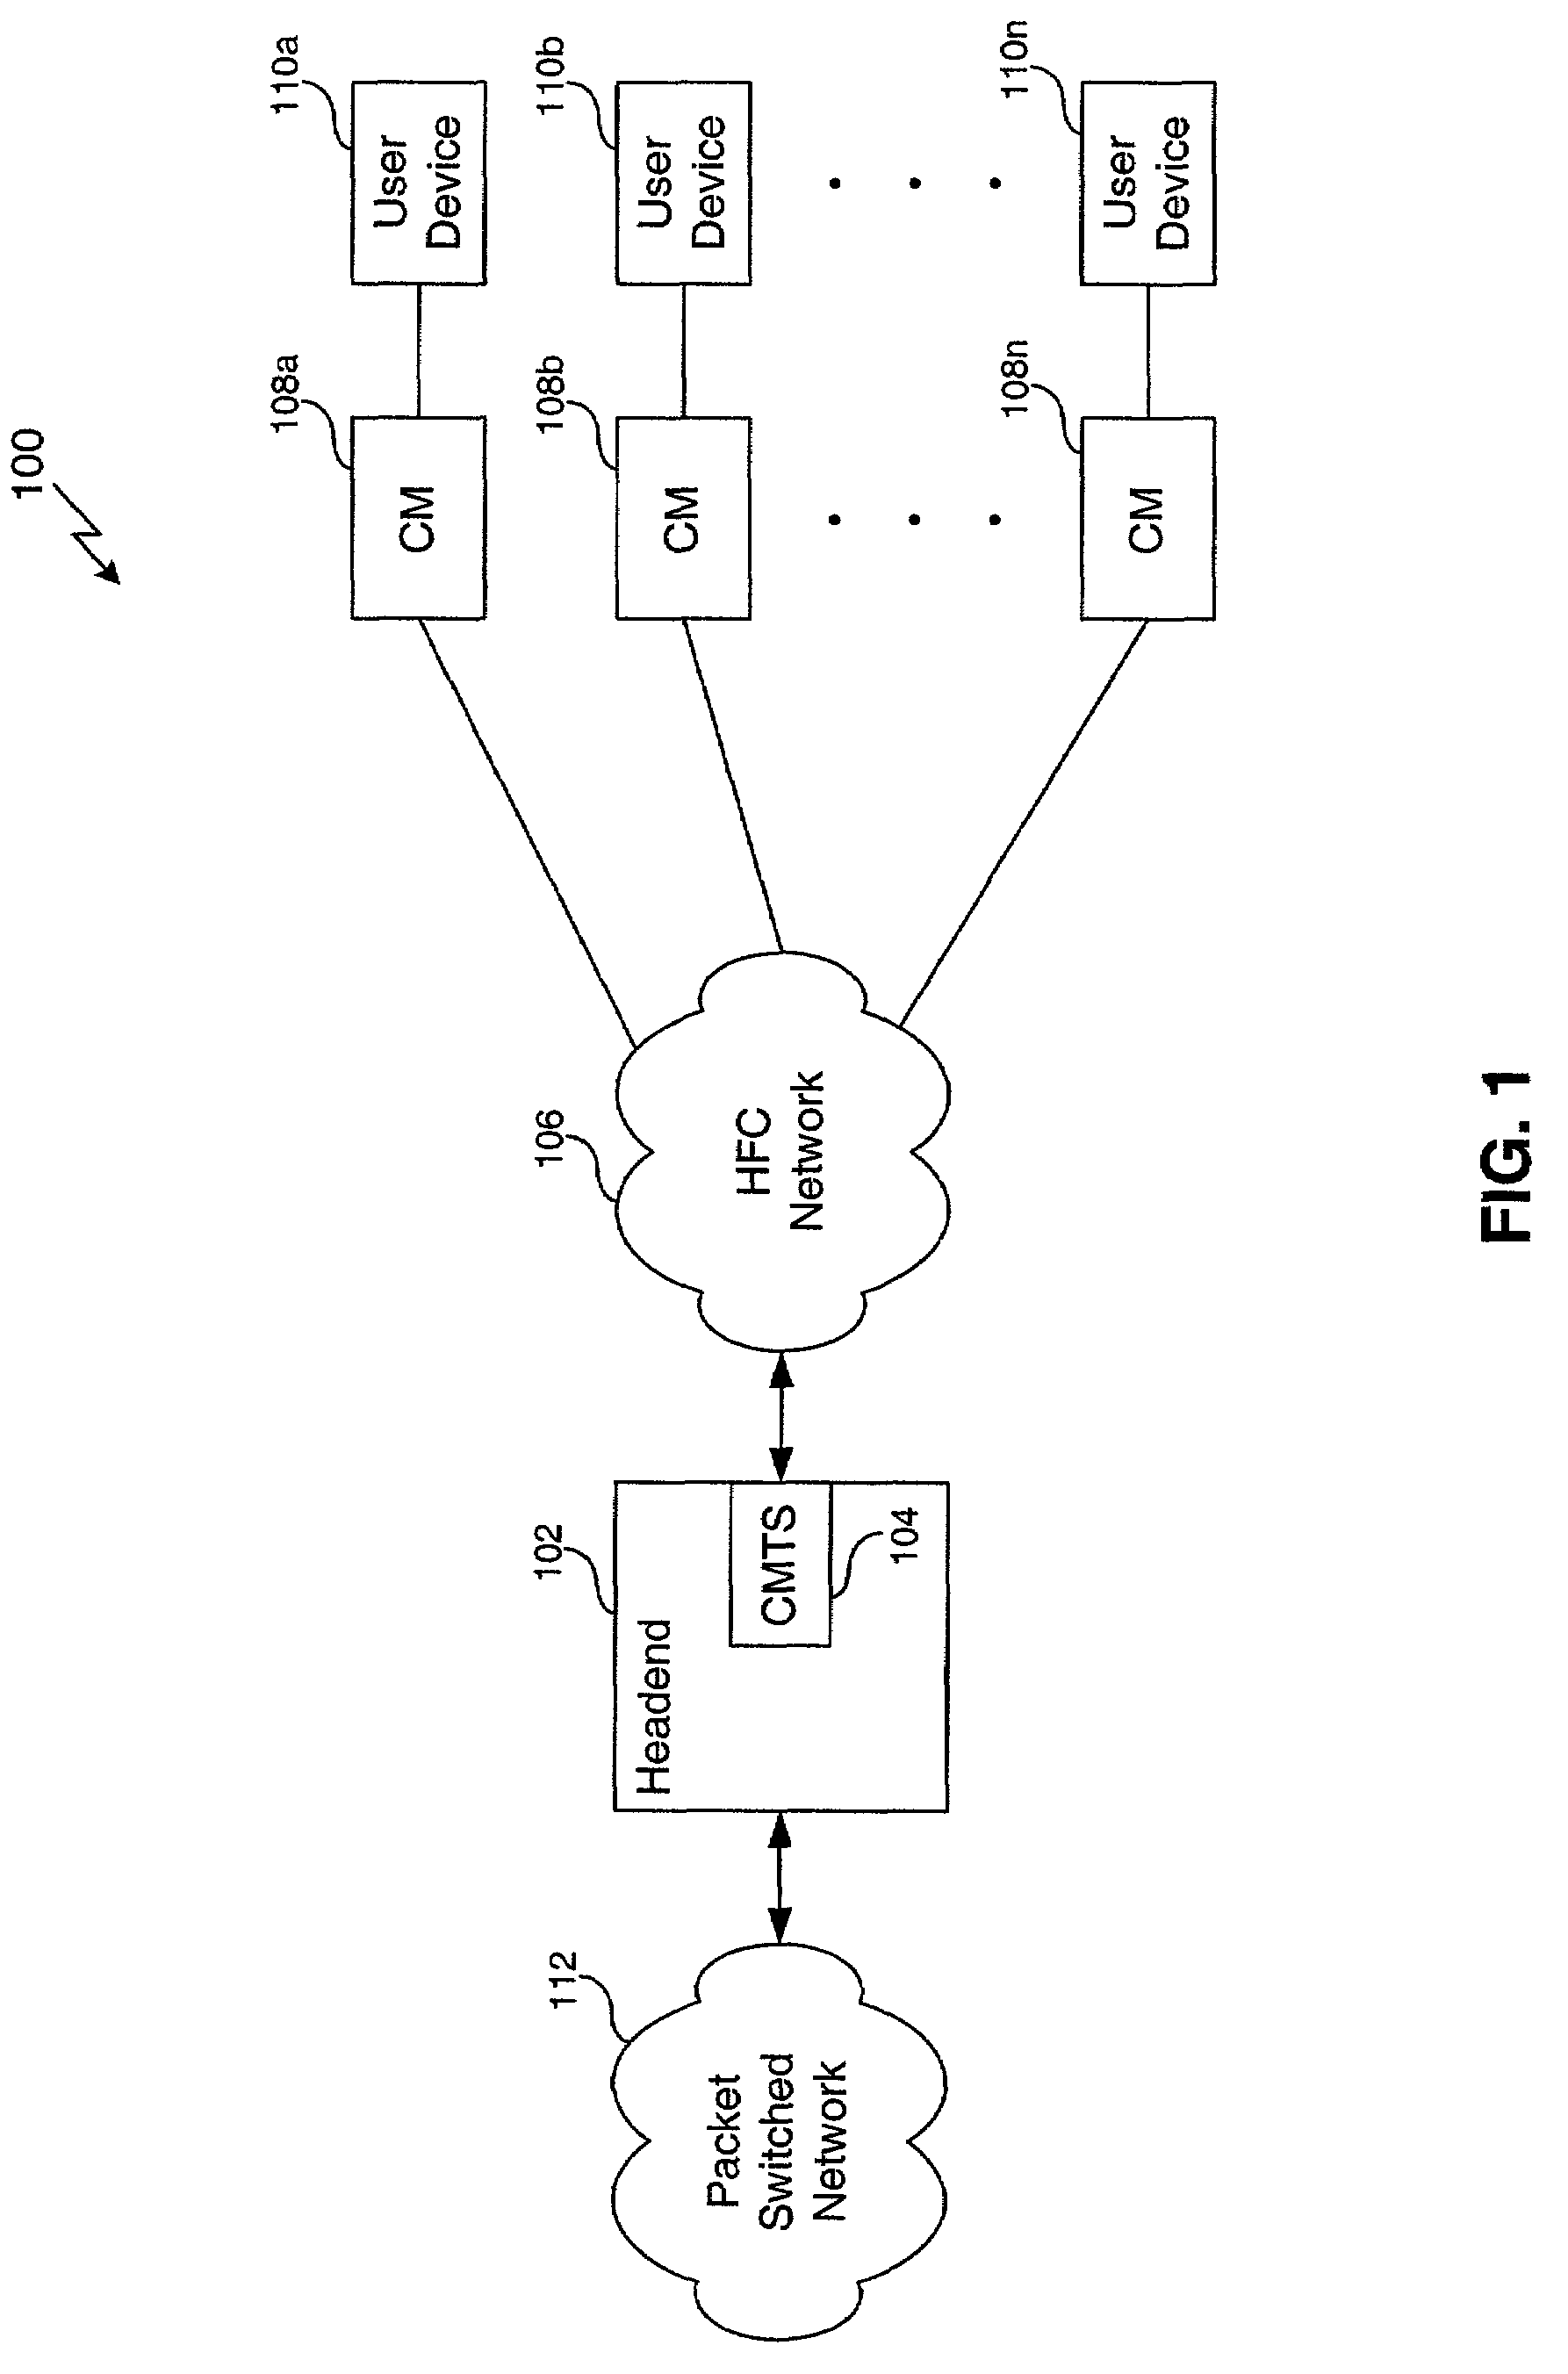 System, method and computer program product for mitigating burst noise in a communications system